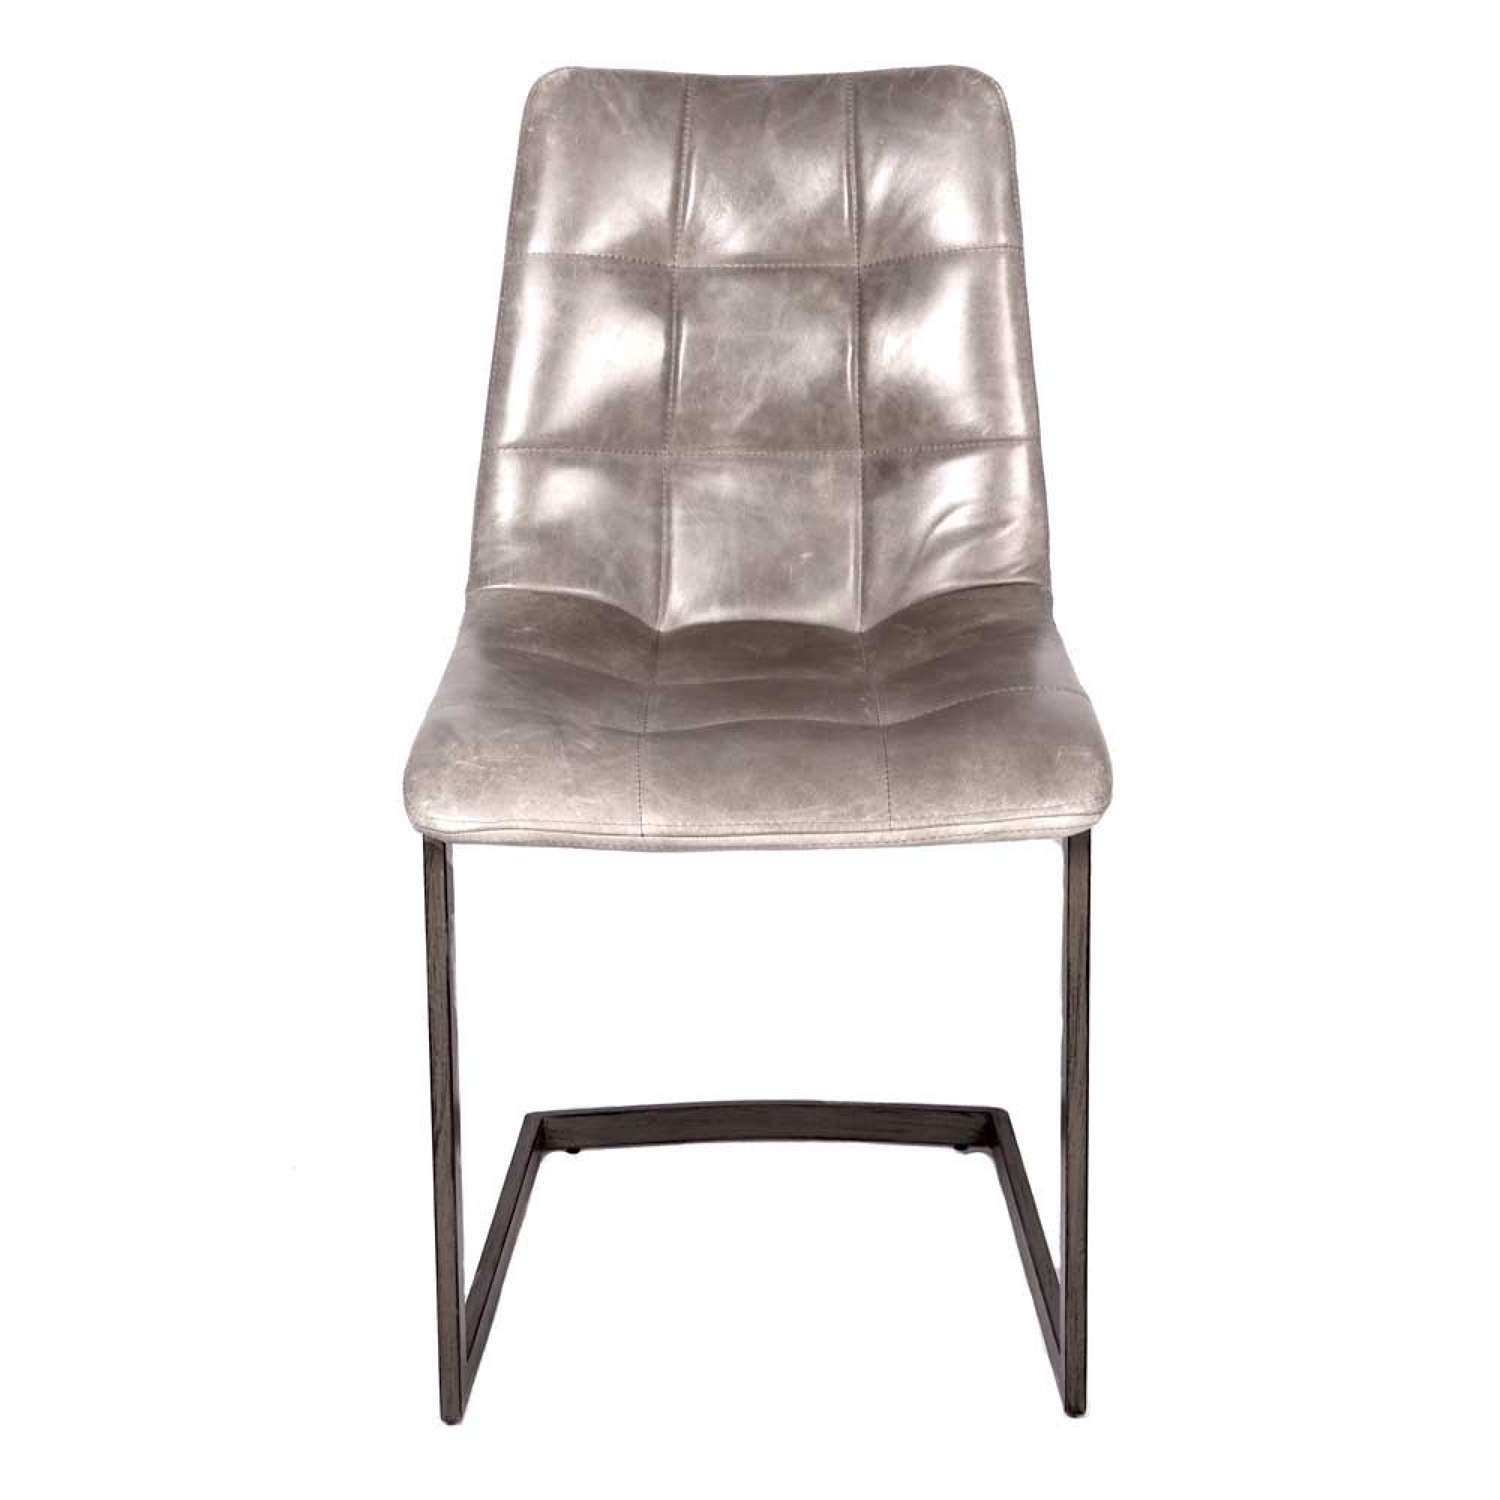 Dolomite Cerato grey leather Dining Chair without piping